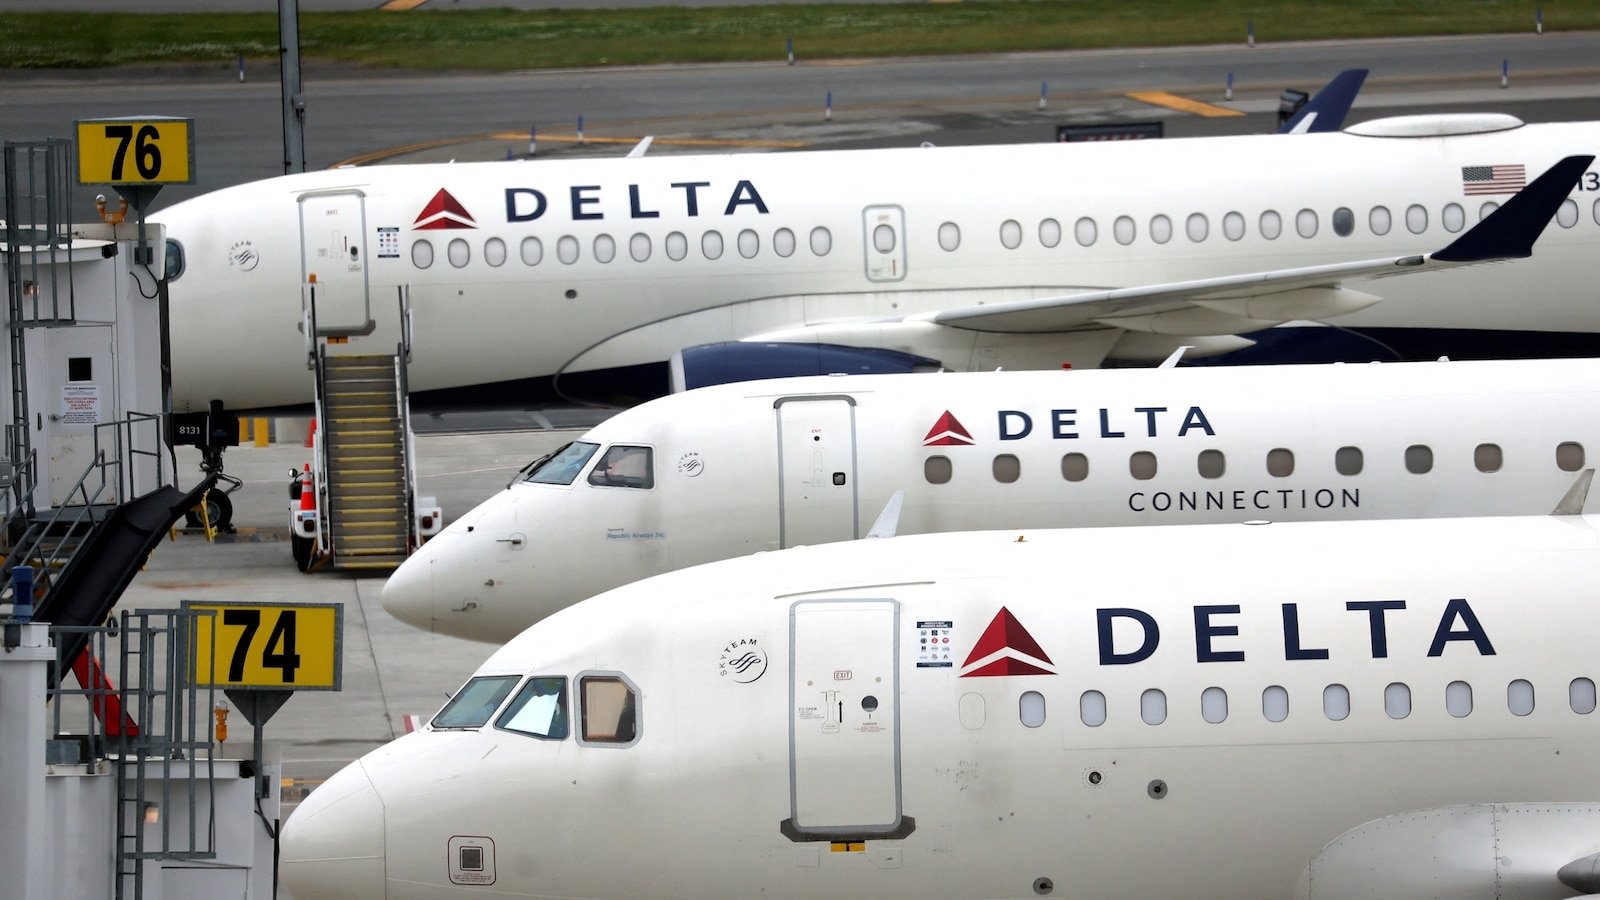 Why did it take days for Delta to restore normal service after outage?